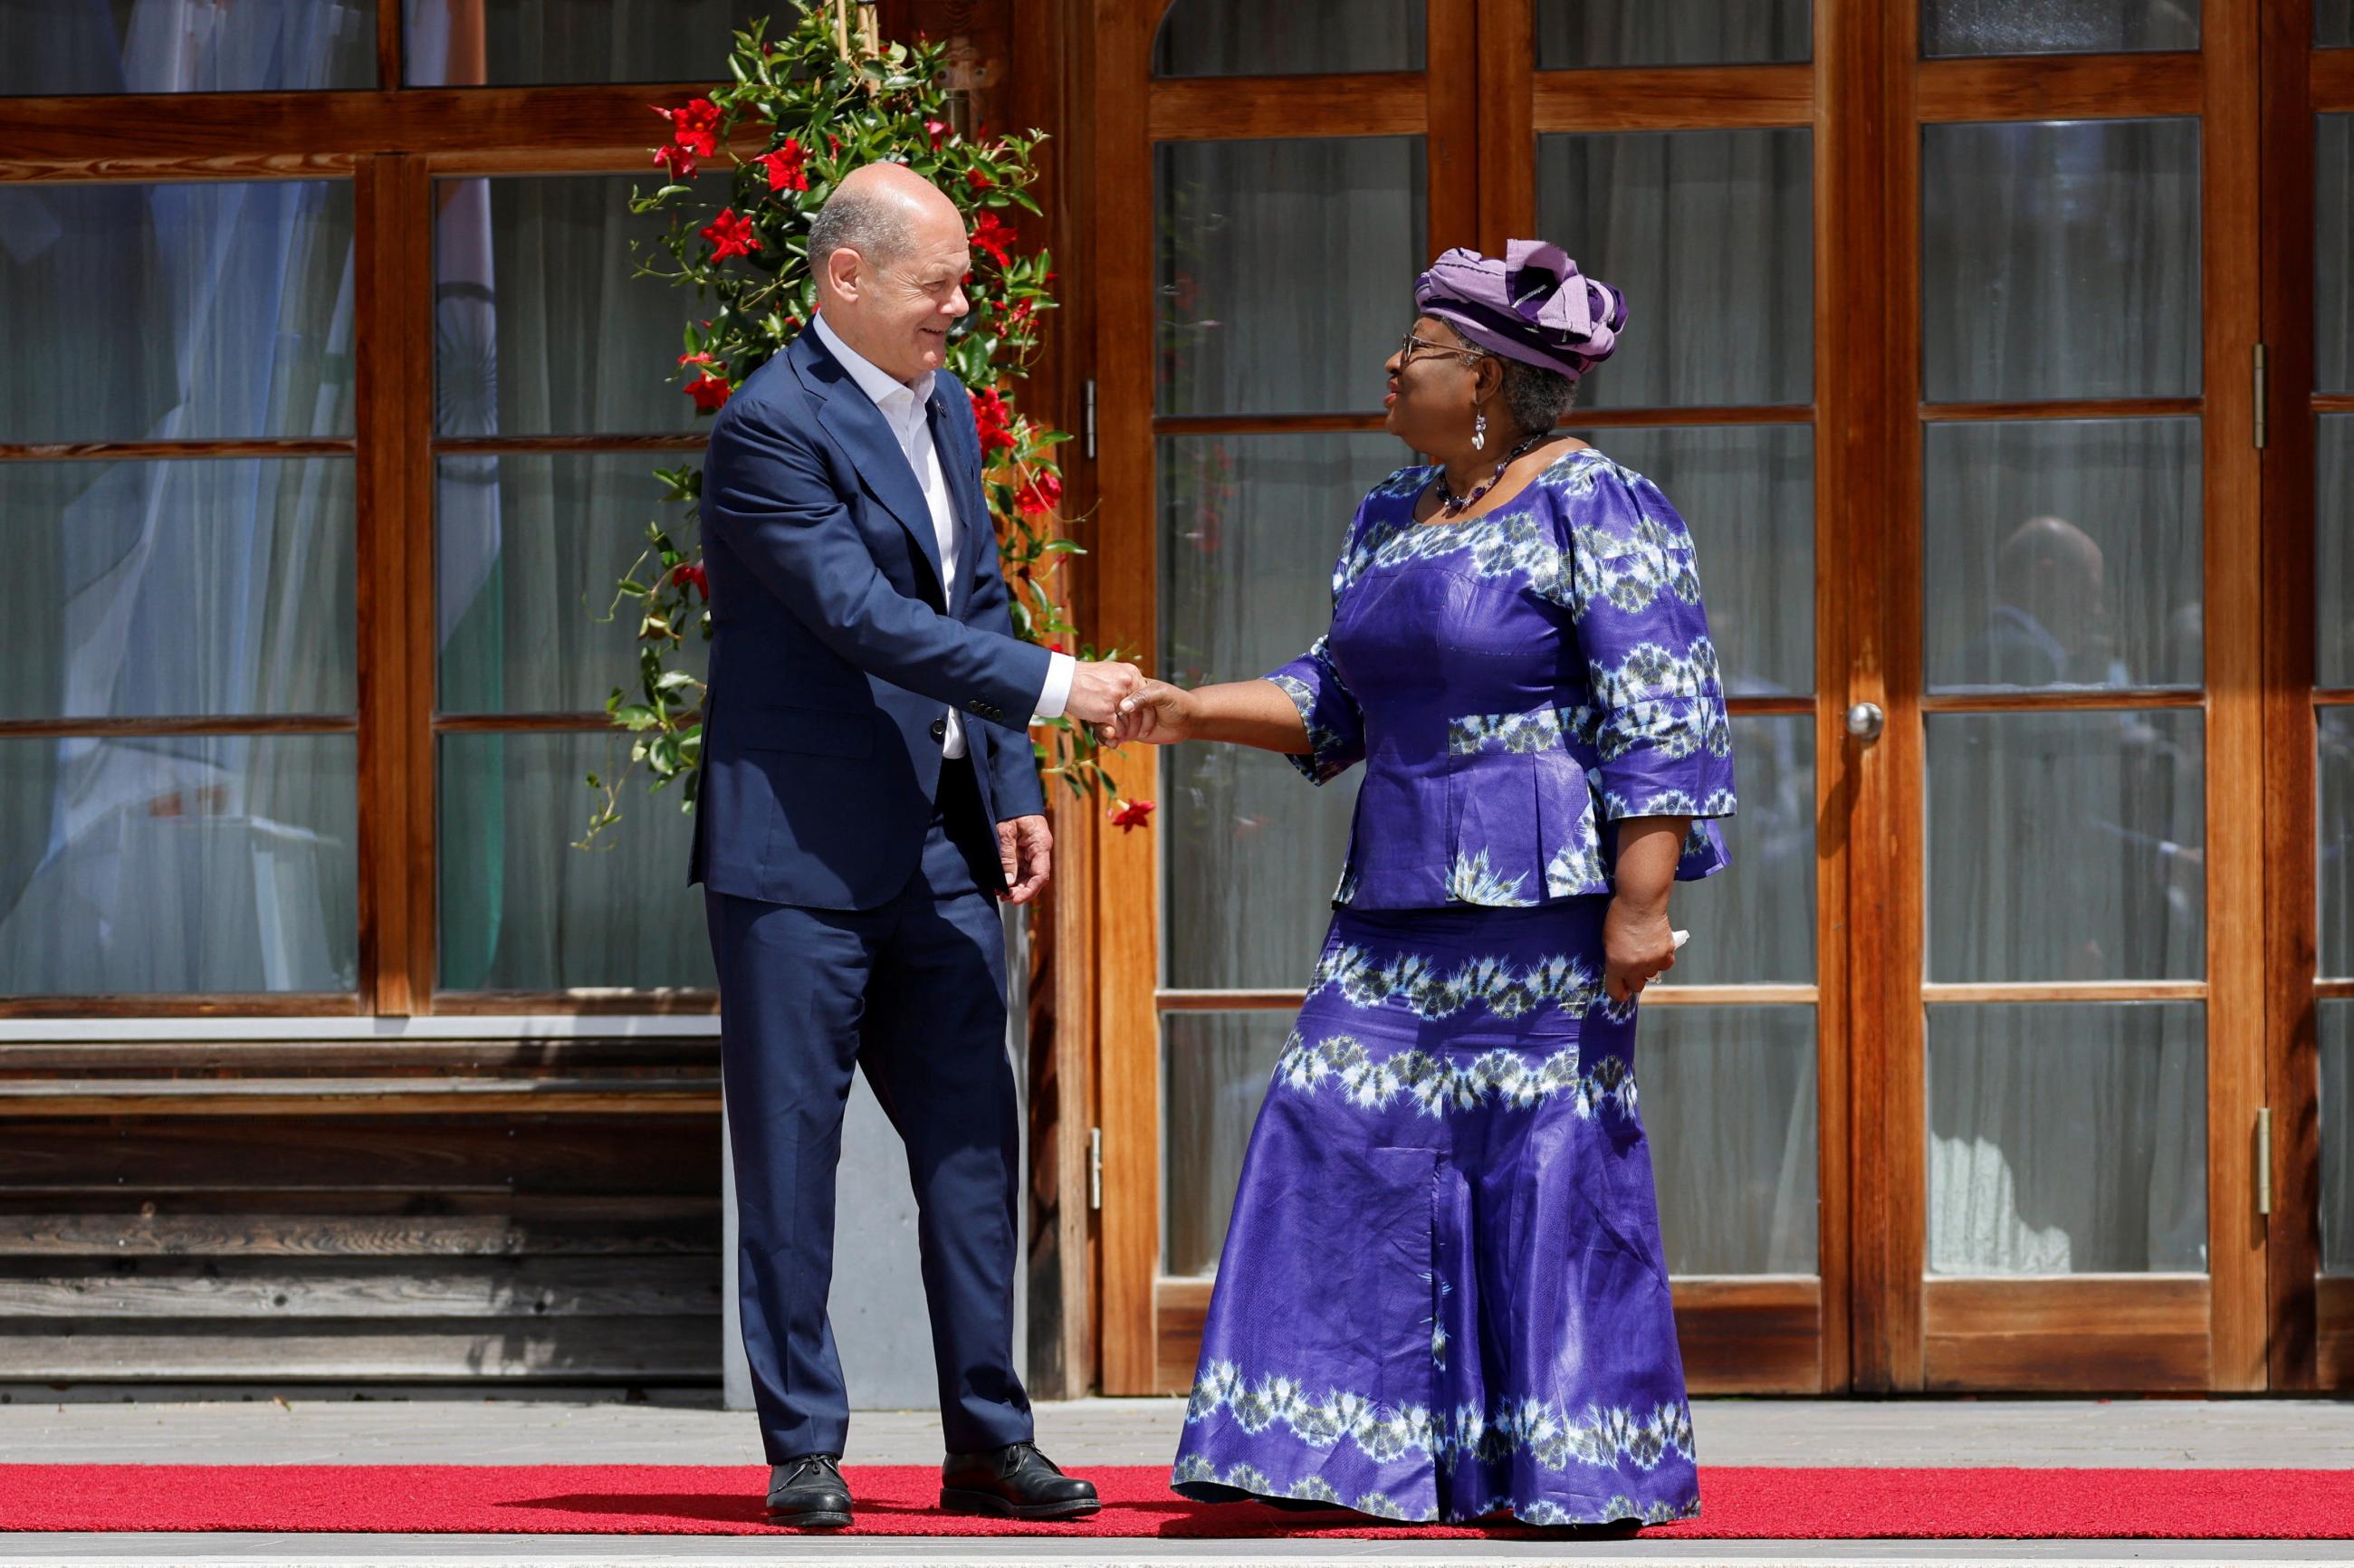 German Chancellor Olaf Scholz welcomes WTO Director-General Ngozi Okonjo-Iweala, at the G7 leaders' summit at Schloss Elmau, in Germany, on June 27, 2022. 